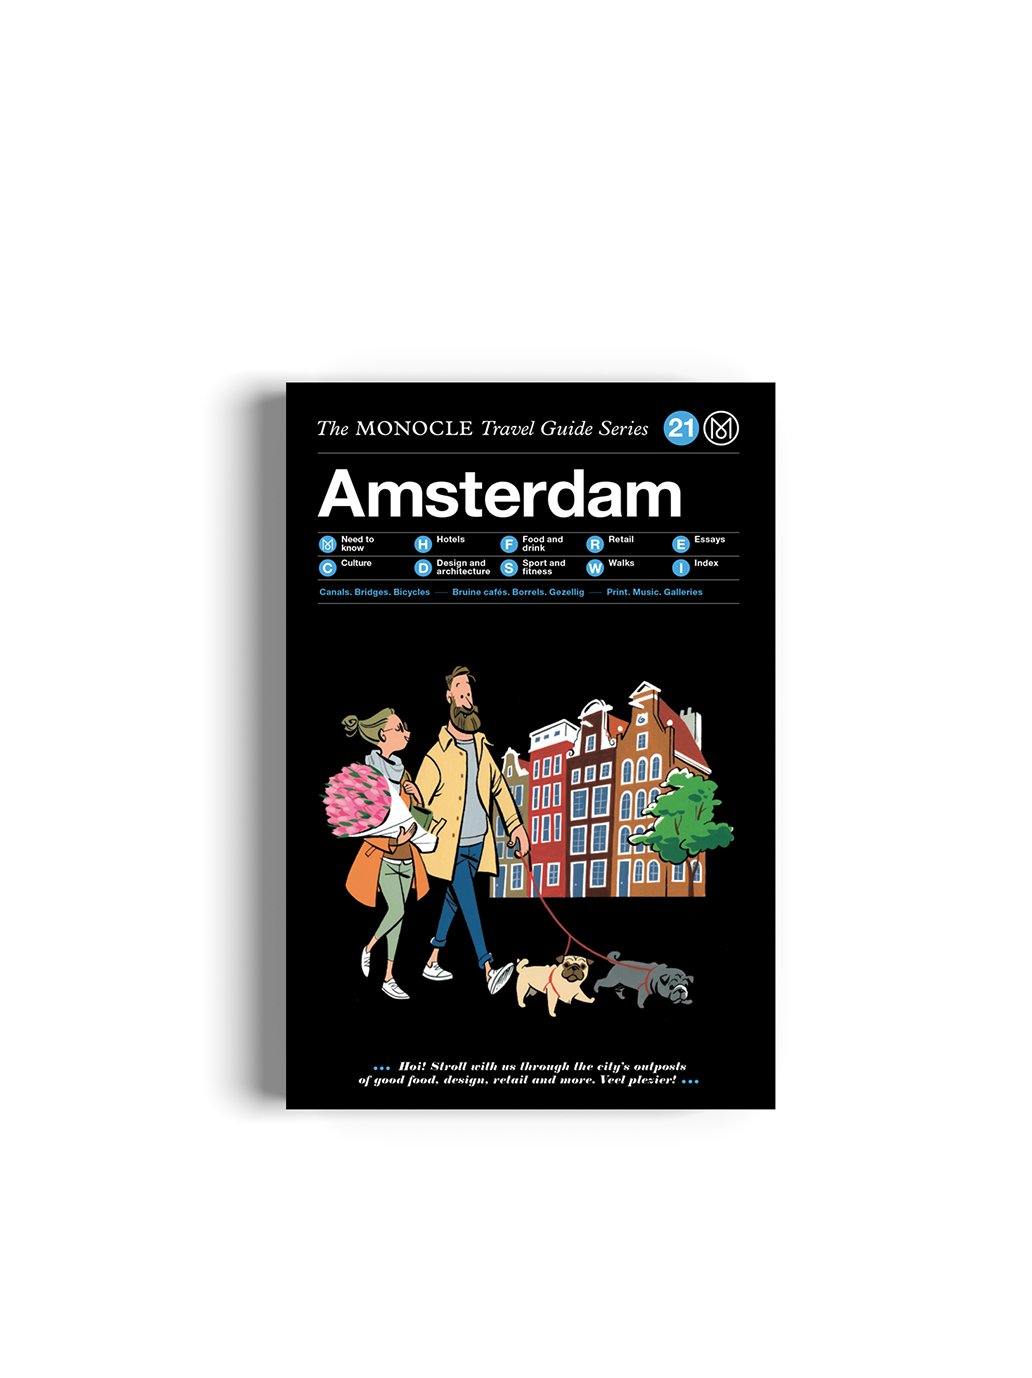 AMSTERDAM: THE MONOCLE TRAVEL GUIDE SERIES